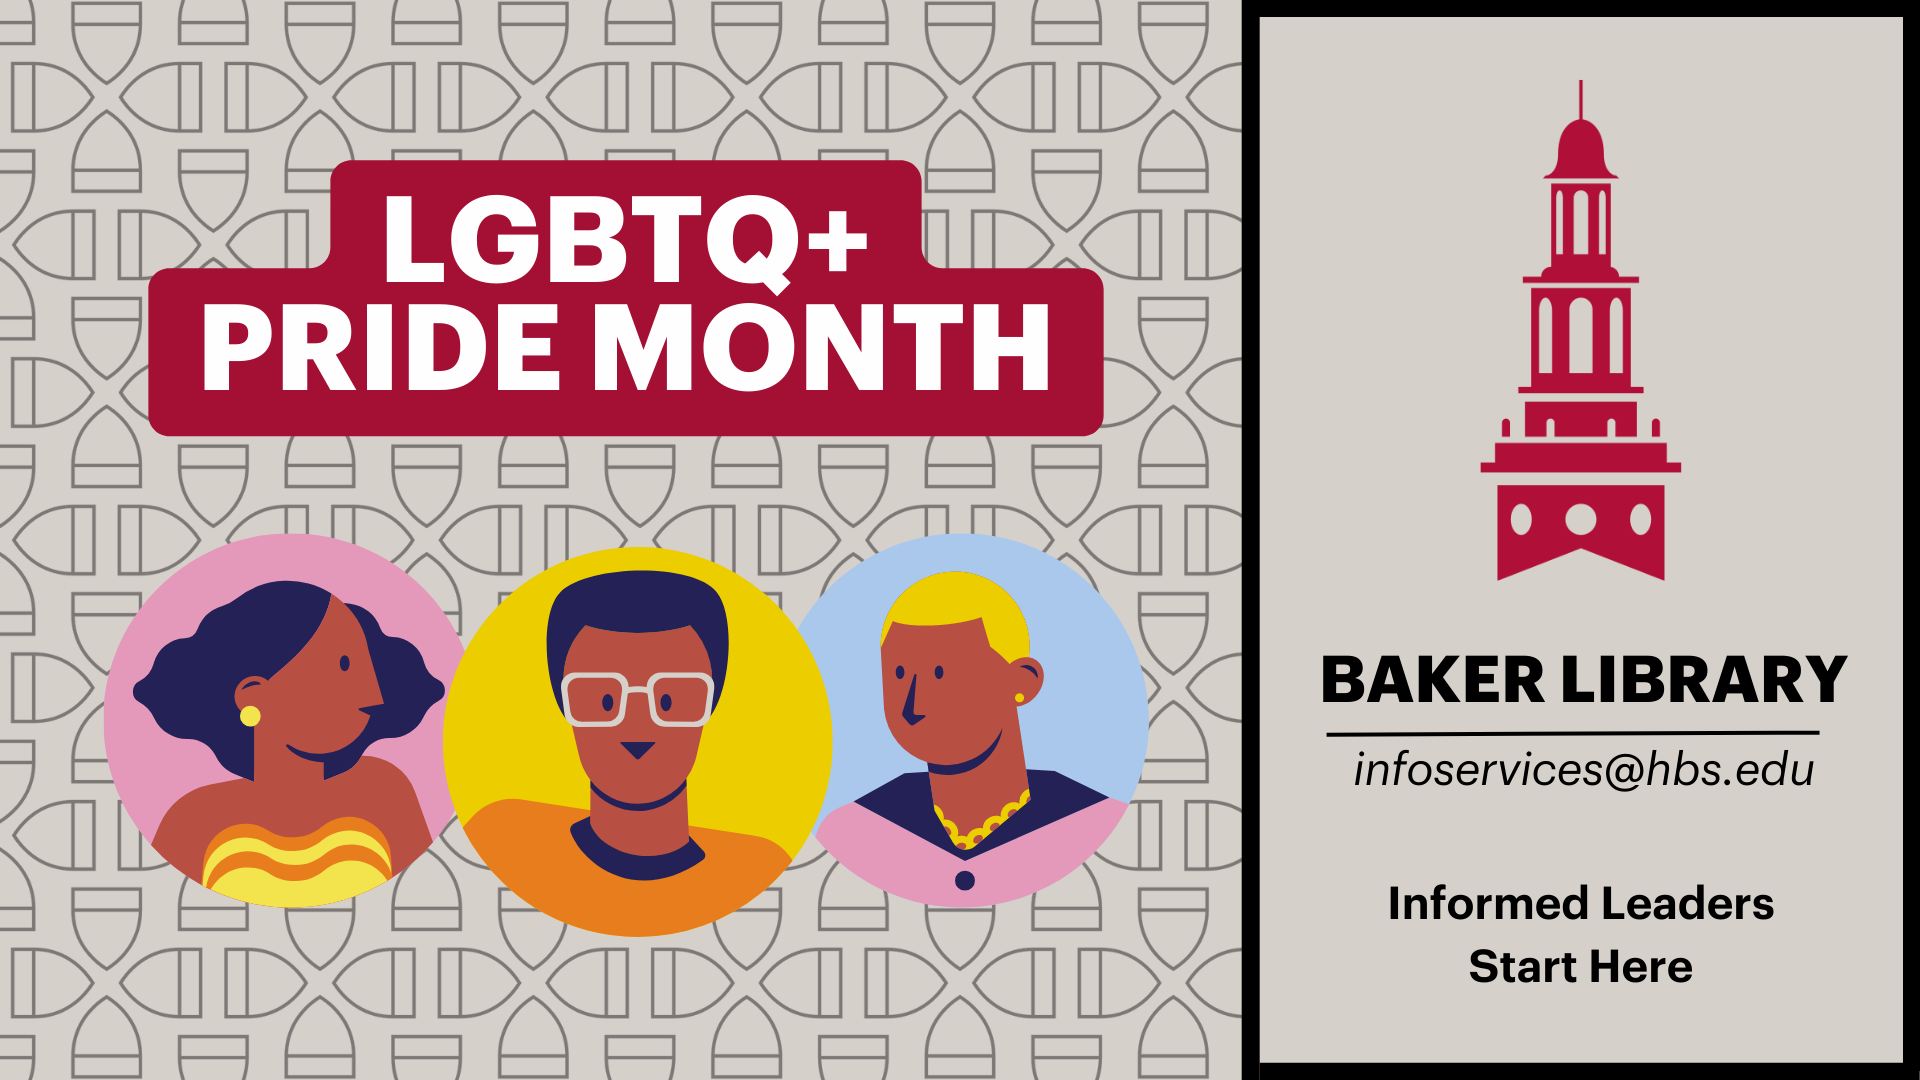 A banner that says "LGBTQ+ Pride Month, Baker Library, Infoservices@hbs.edu, Informed Leaders Start Here." The banner also includes images of people and the Baker Library bell tower